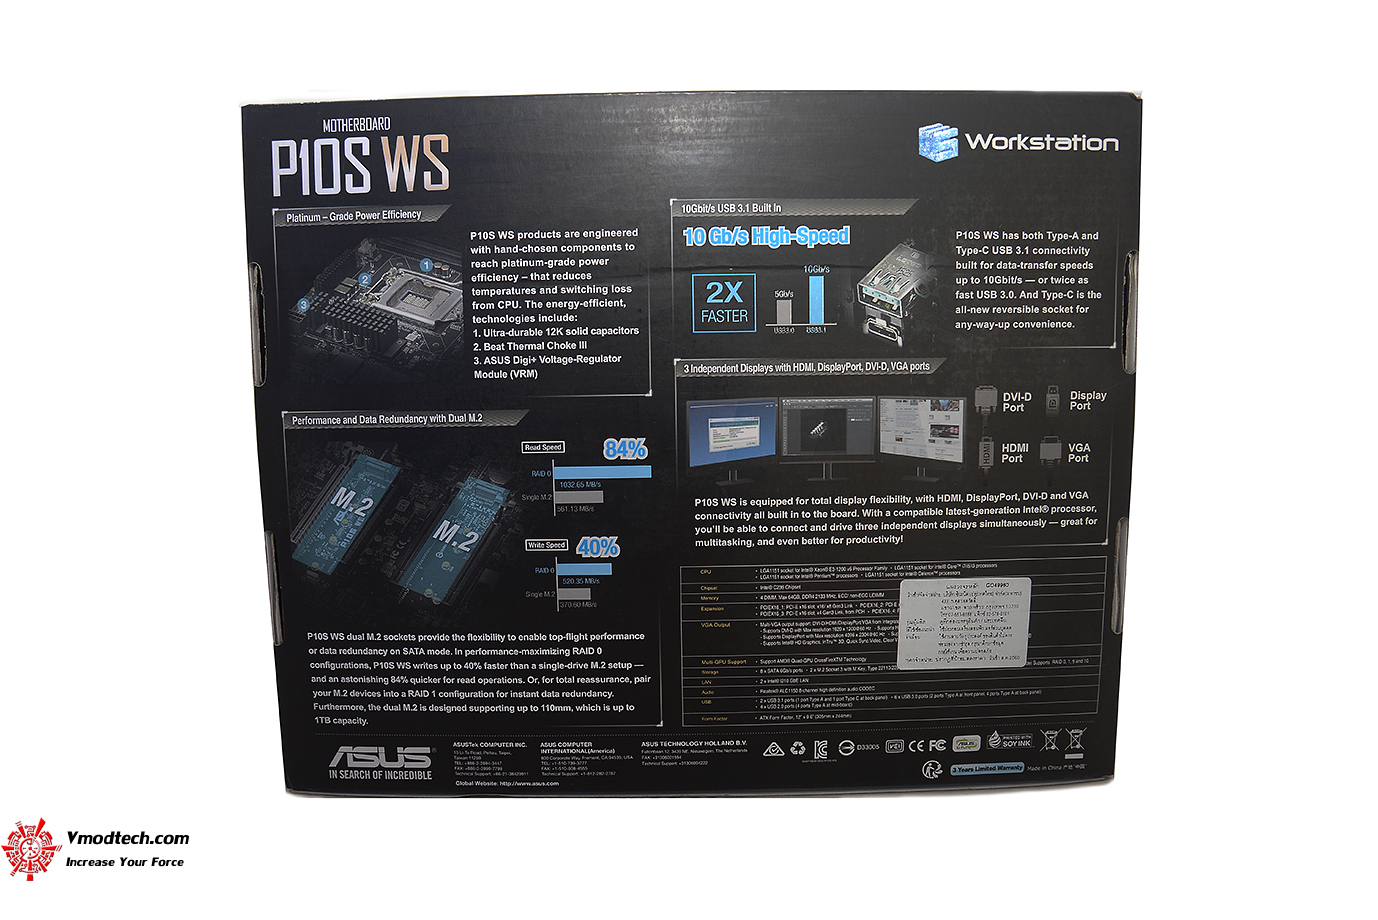 dsc 9281 ASUS P10S WS Workstation Motherboard Review 